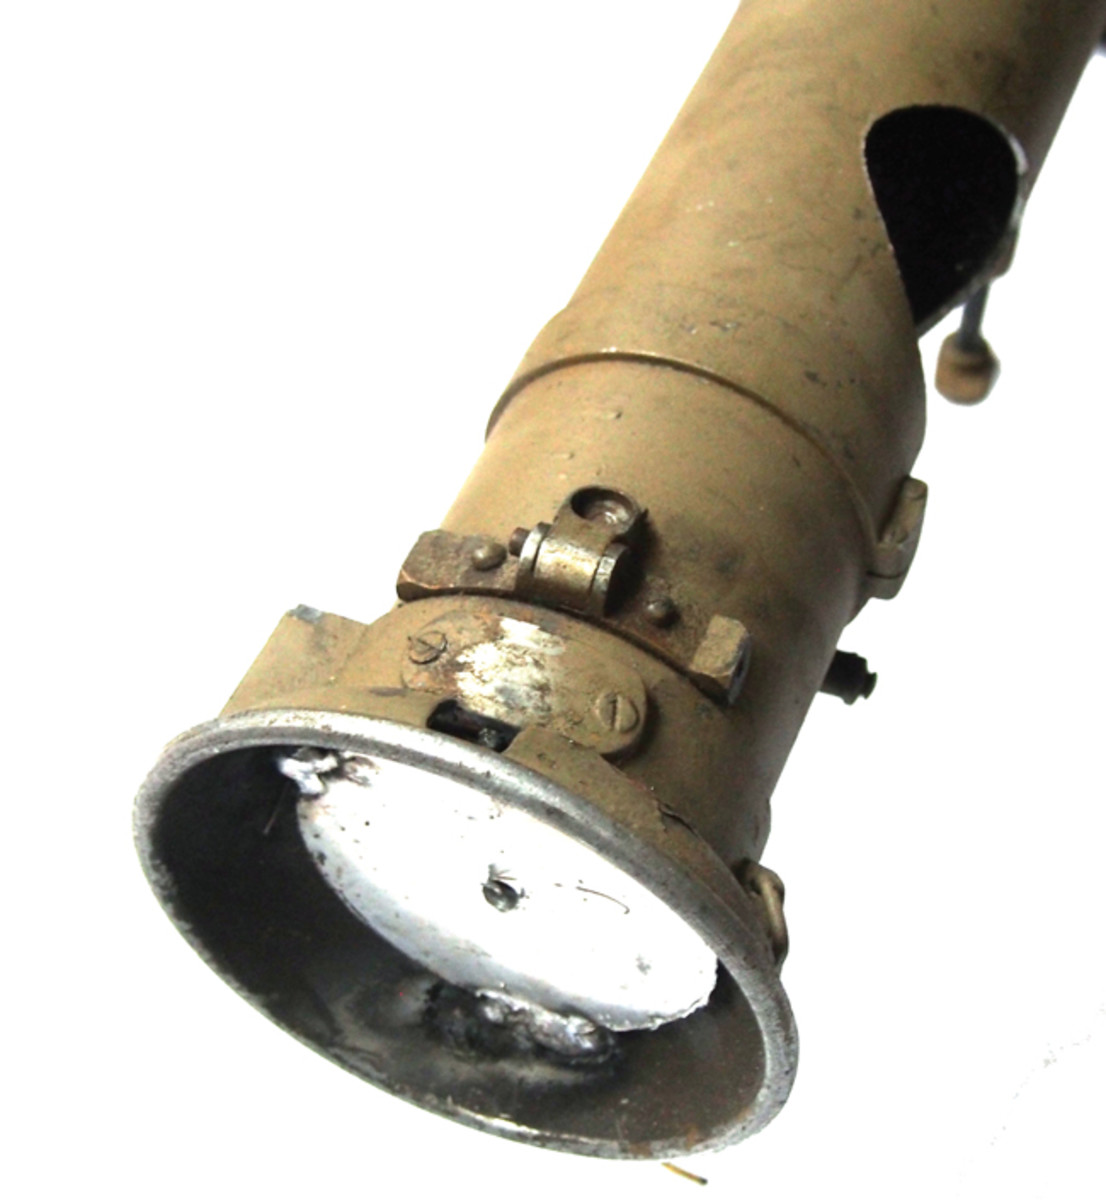 This Spanish Instalaza –—a copy of the American “Super Bazooka” — was sold via a military surplus catalog. It has been properly cut on the side and had a round disc welded to the rear of the muzzle. This was probably overkill to ensure that it was deactivated properly, but it is always better to err on the side of caution.